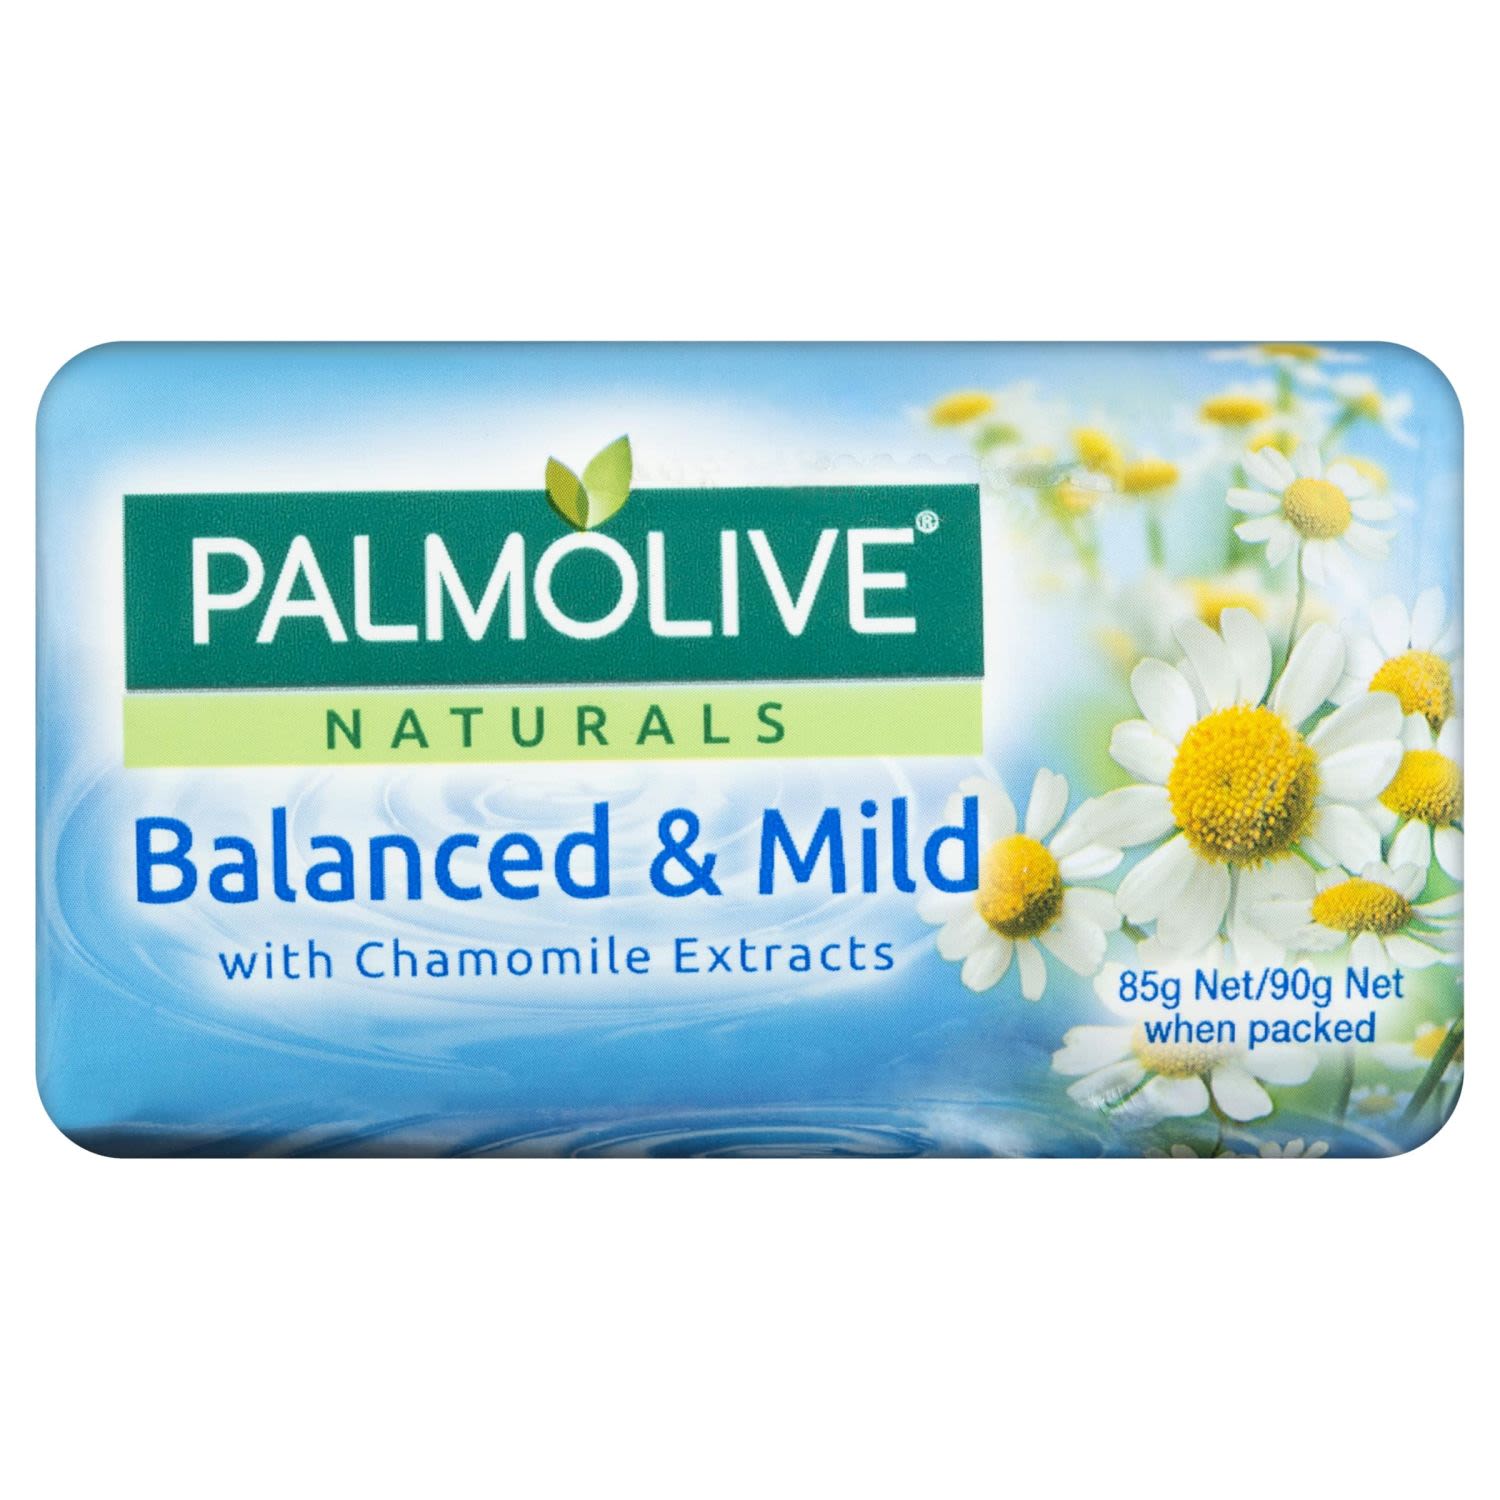 Palmolive Naturals Bar Soap Balanced & Mild Chamomile Extracts, 4 Each